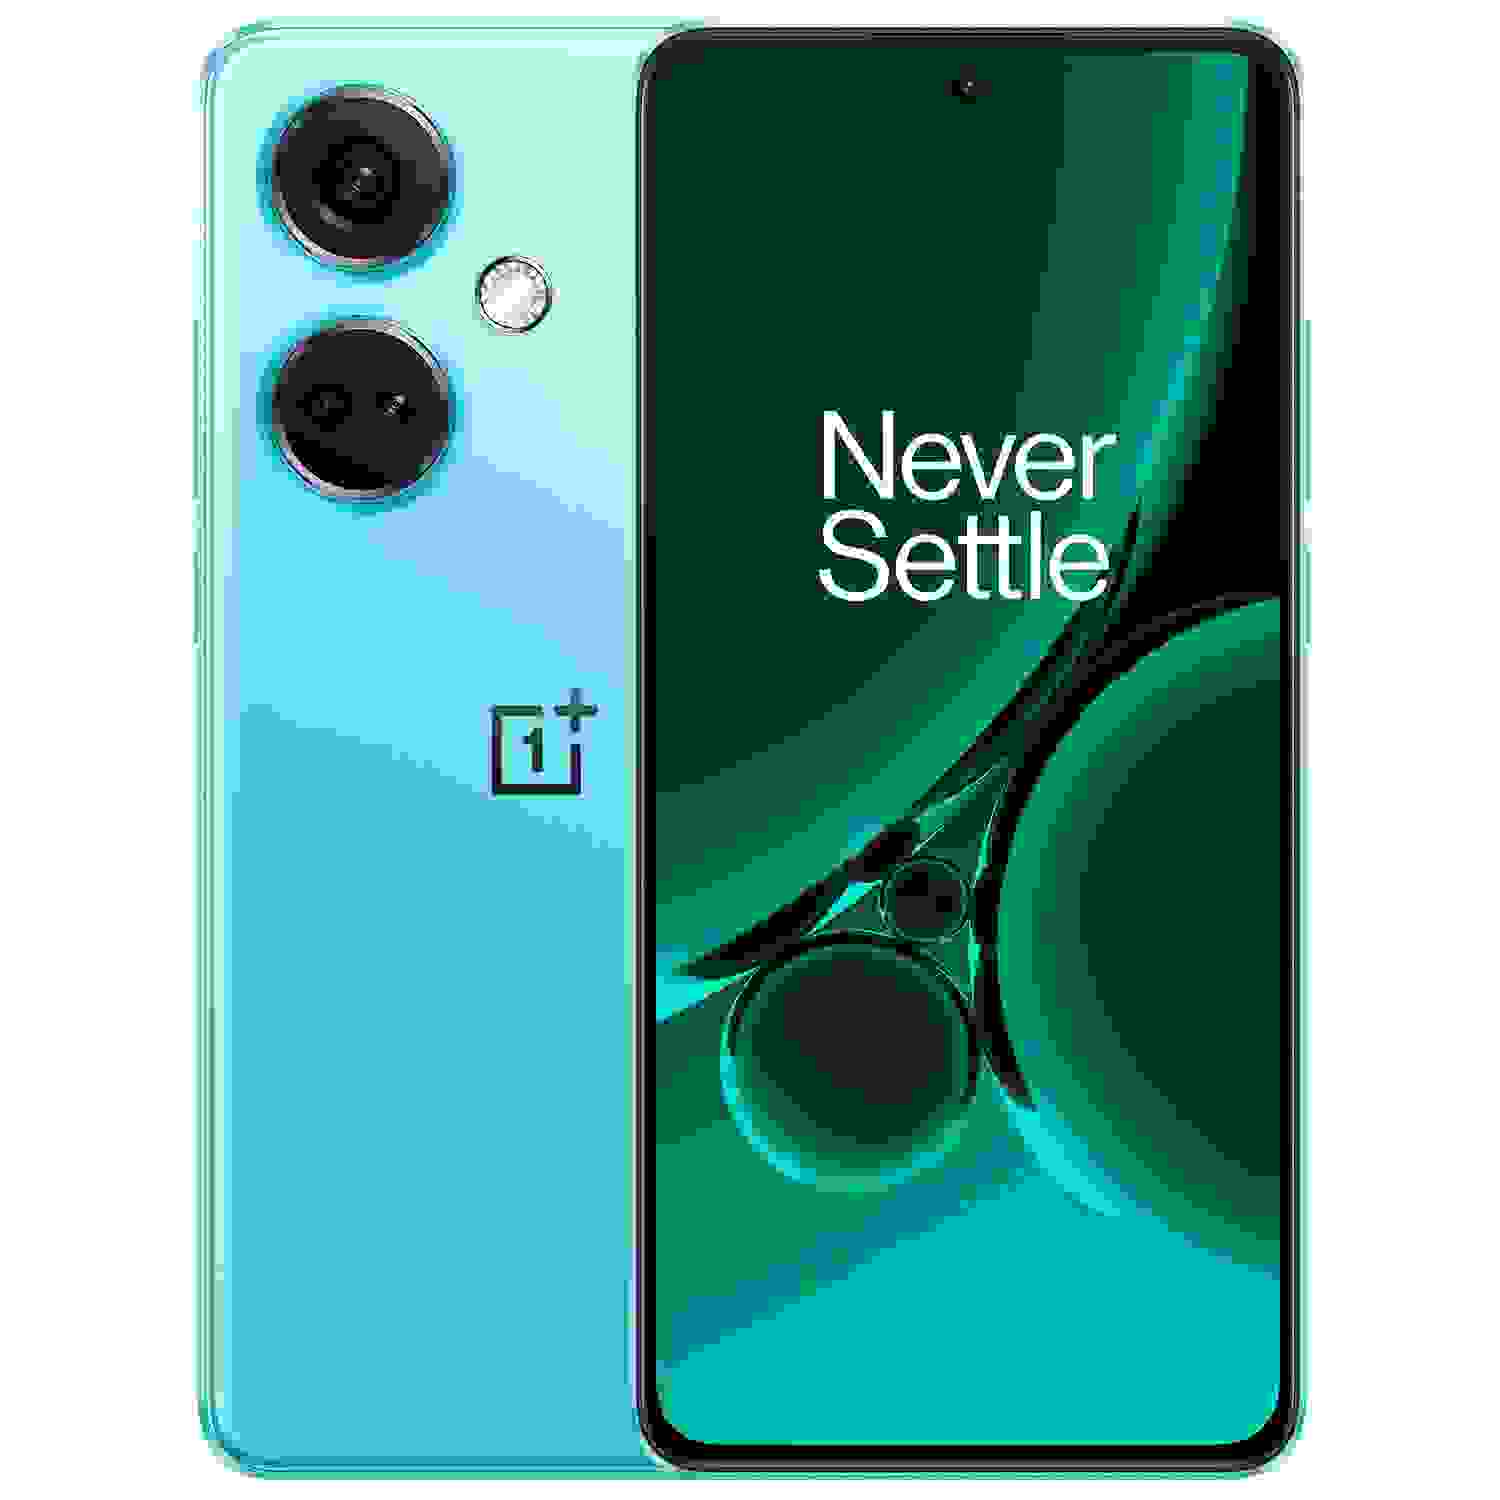 oneplus nord ce 3 5g smartphone offer